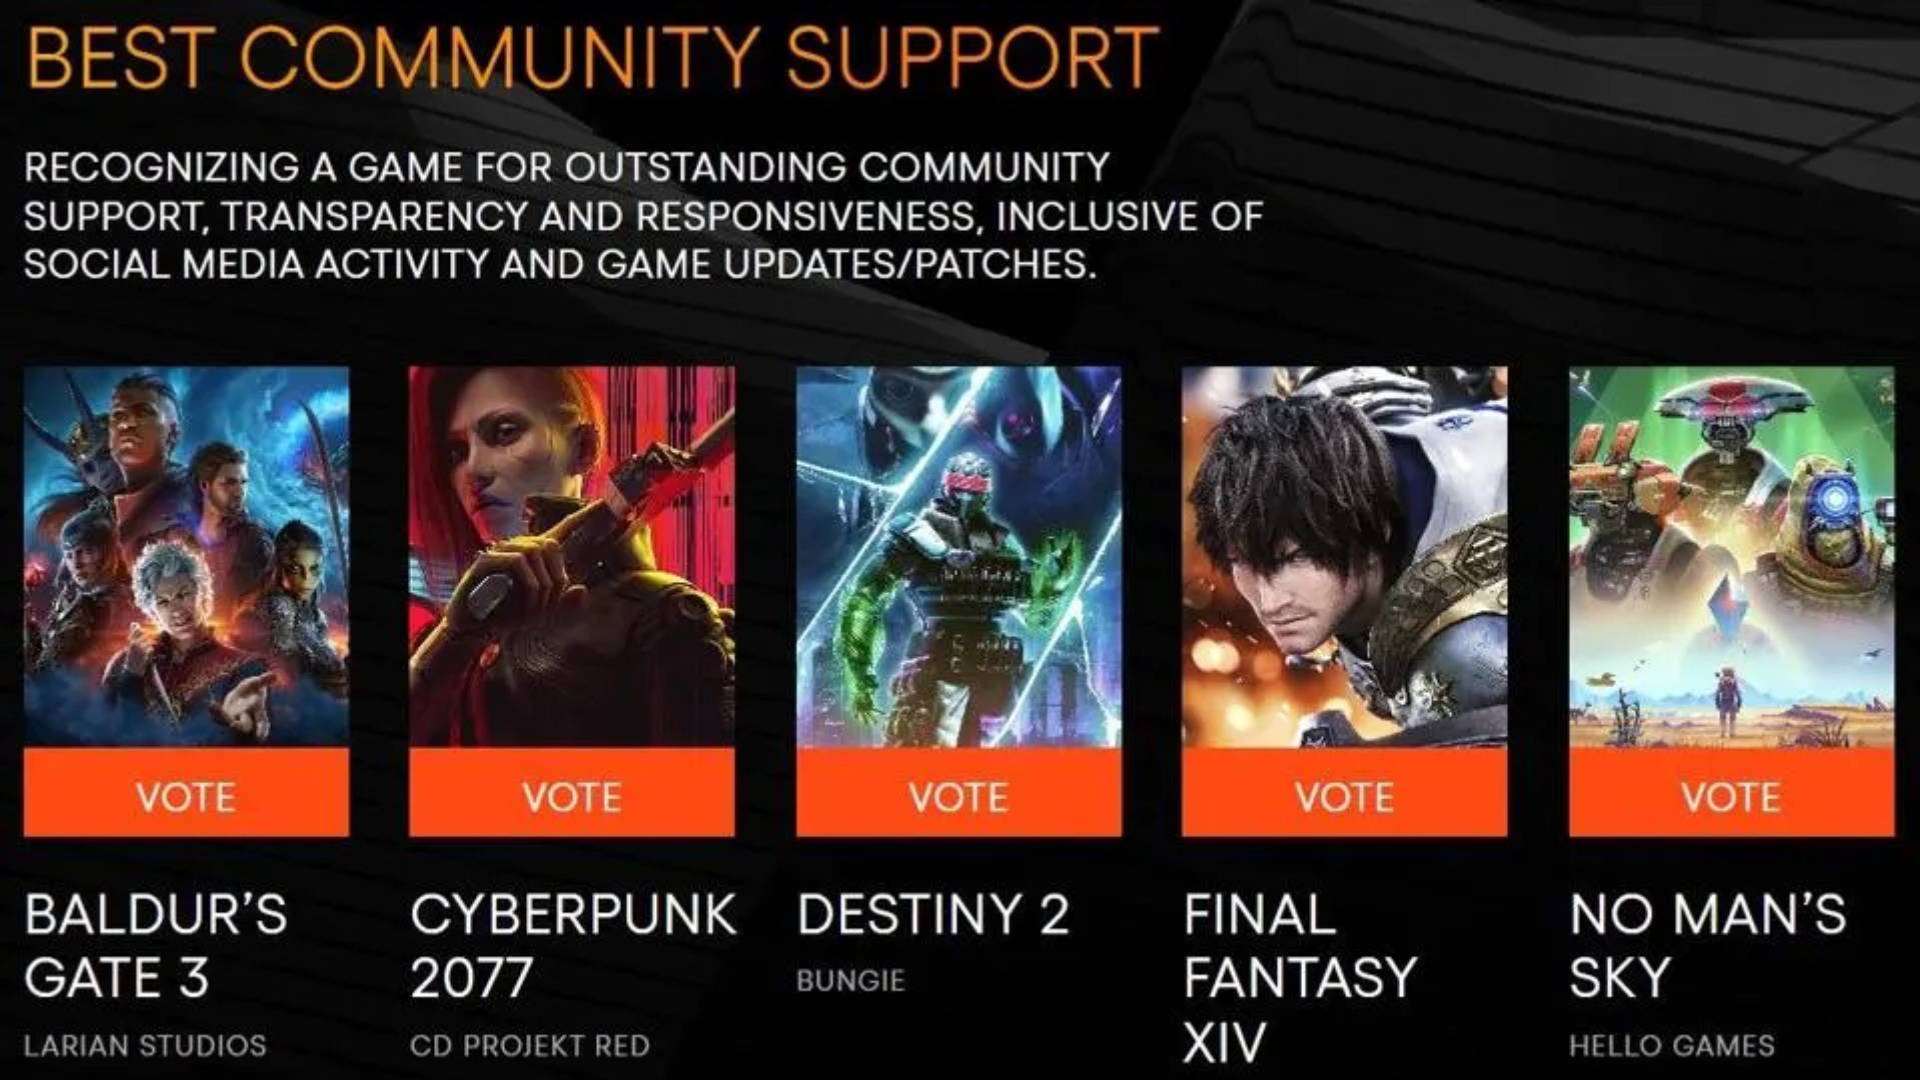 Destiny 2 Got Undeservedly Nominated at The Game Awards 2023